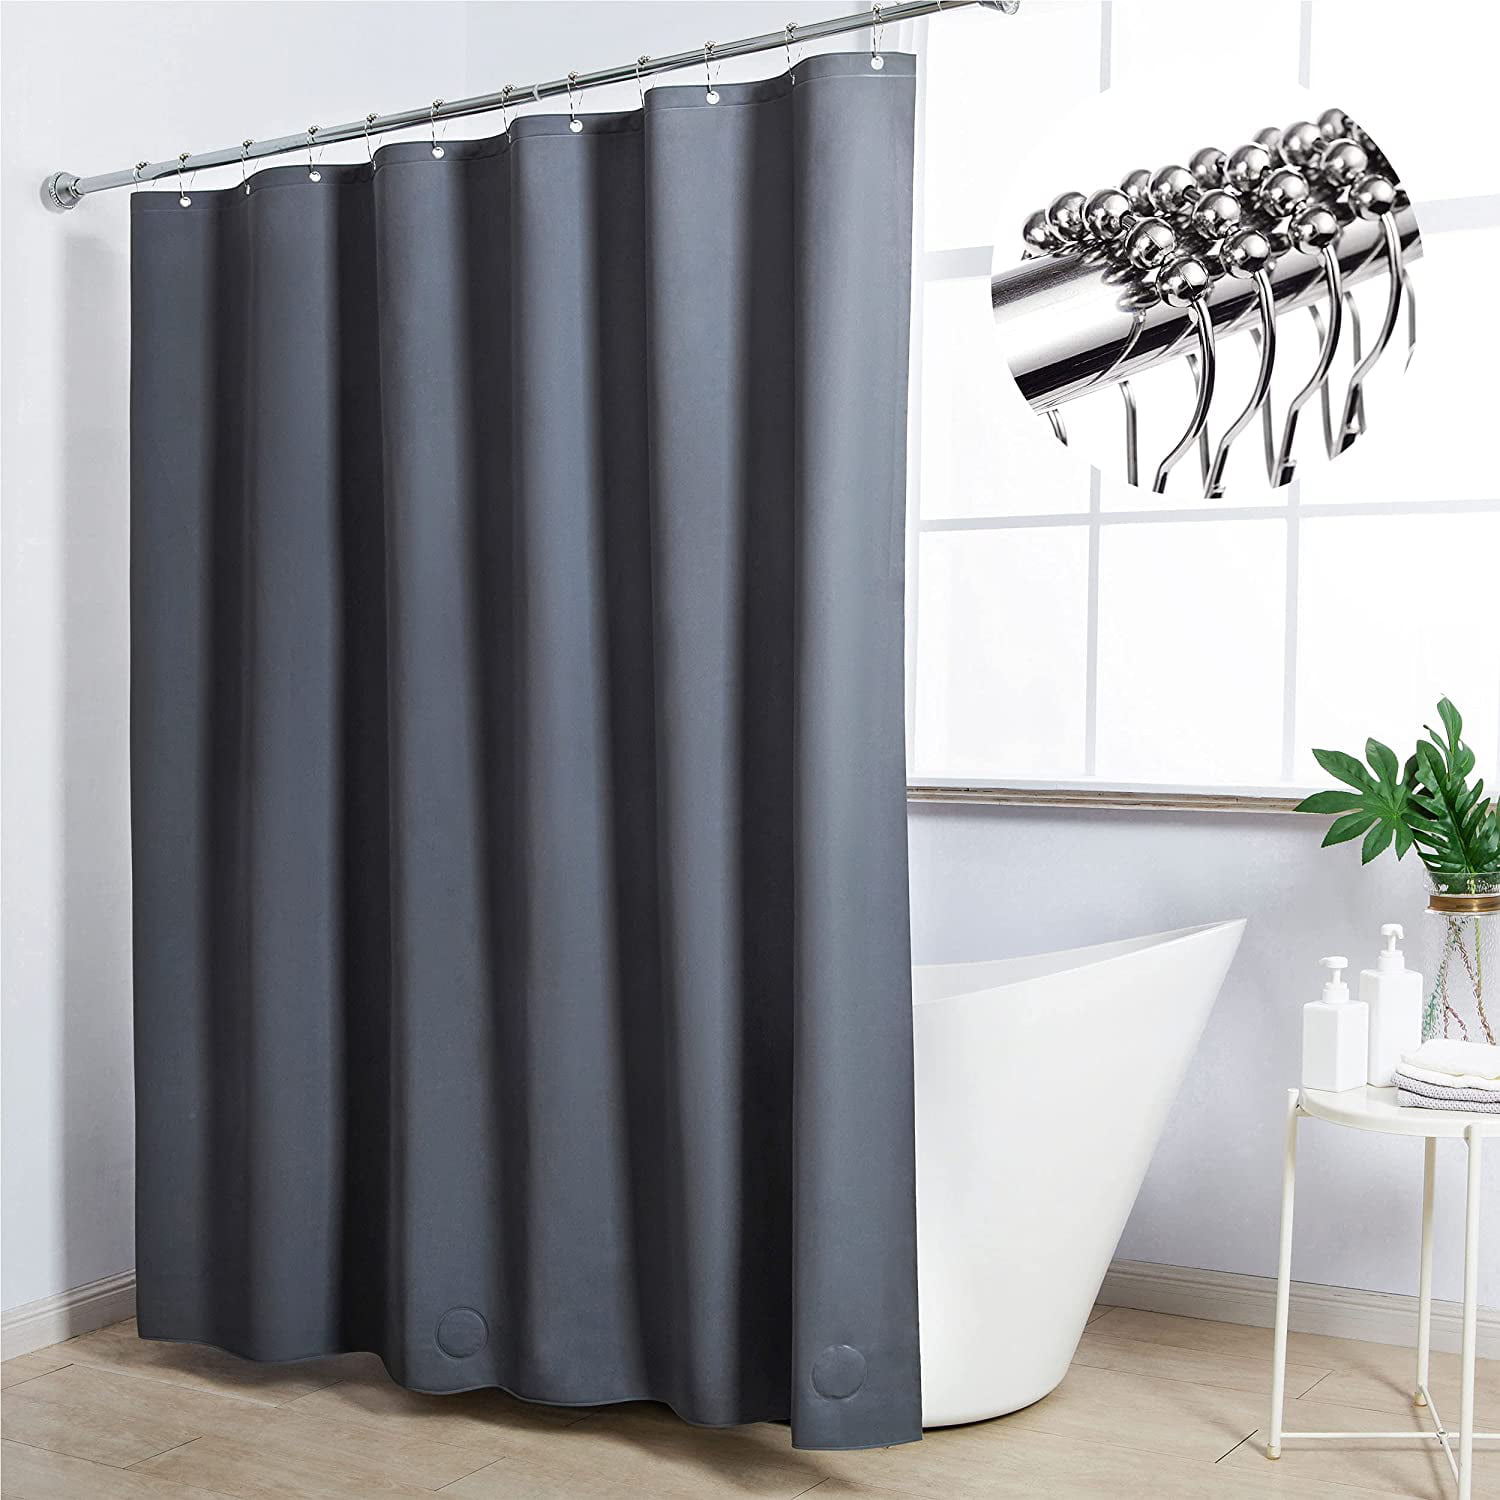 Waterproof Bath Curtain EVA Shower Liner Water Cube Effect Clear Ryhpez 3D Shower Curtain with Stainless Hooks 72x72 Inches